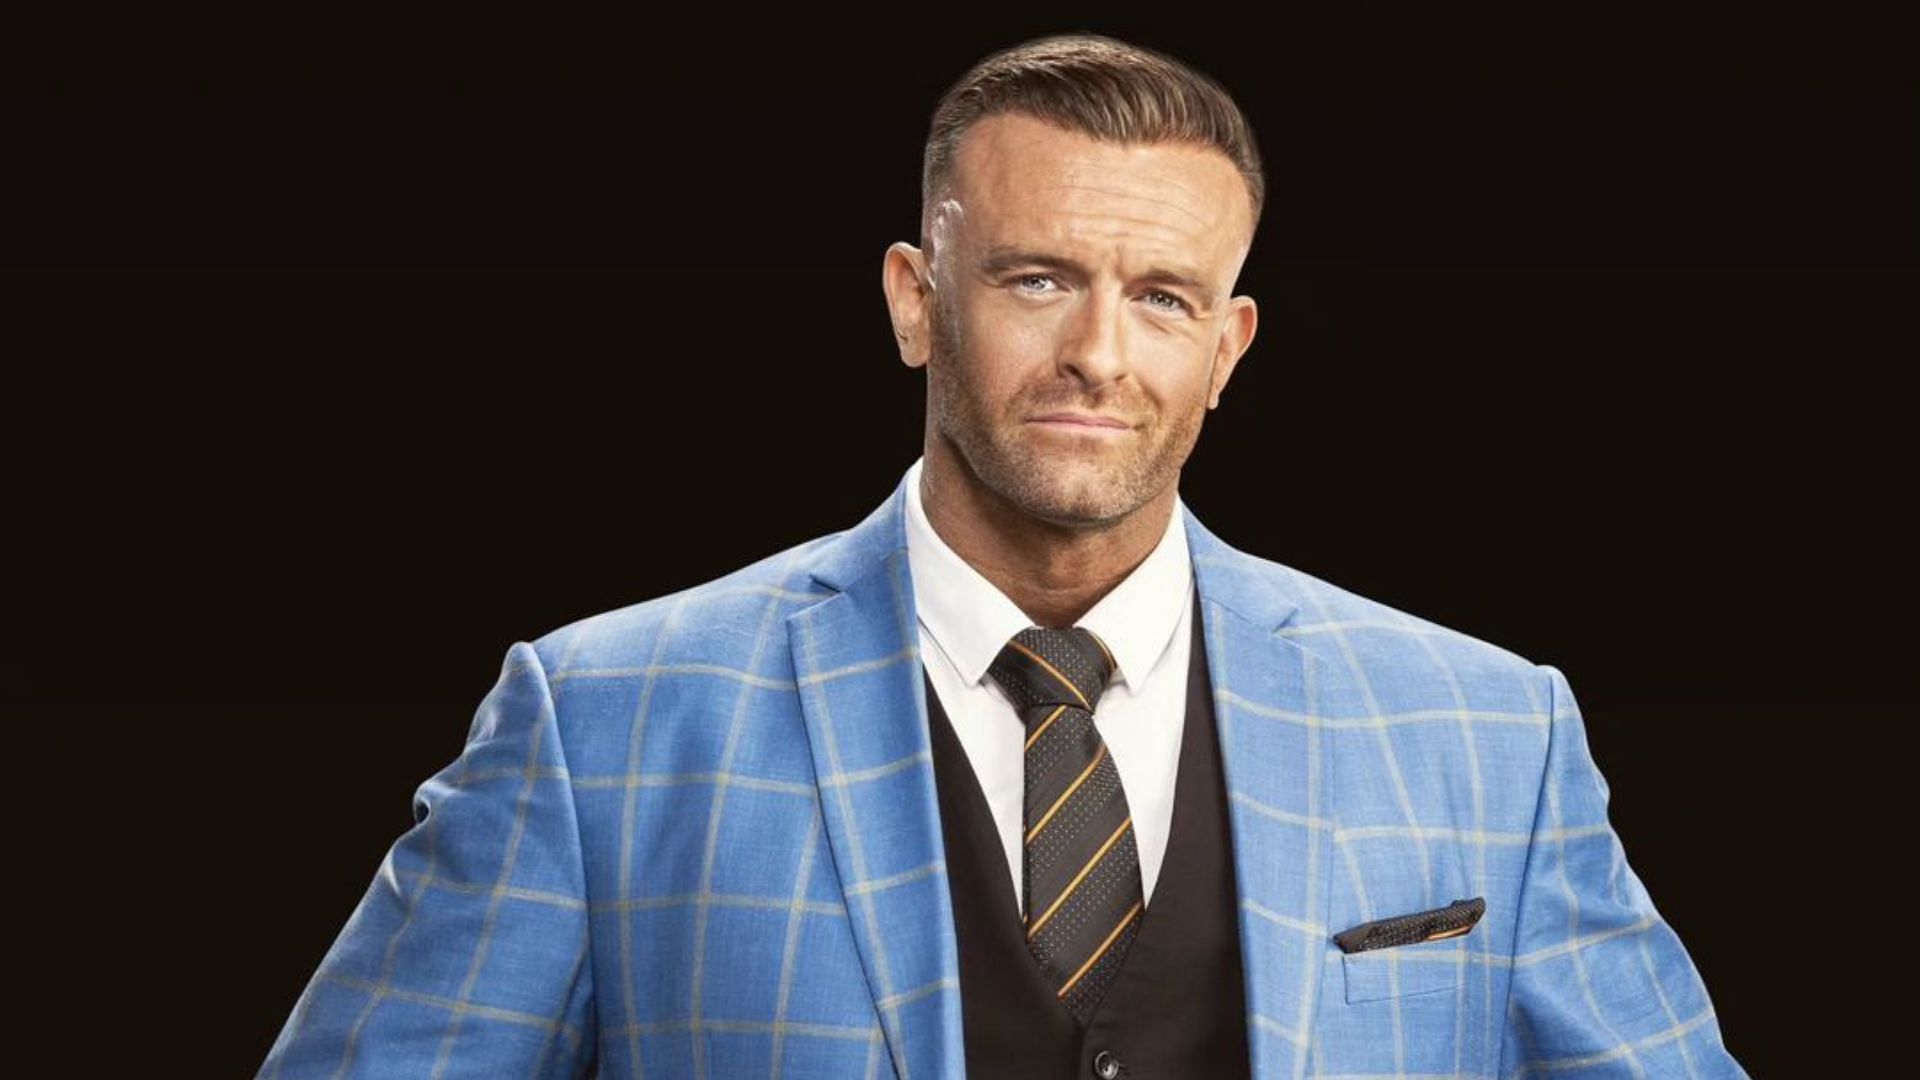 Nick Aldis is the current GM on SmackDown